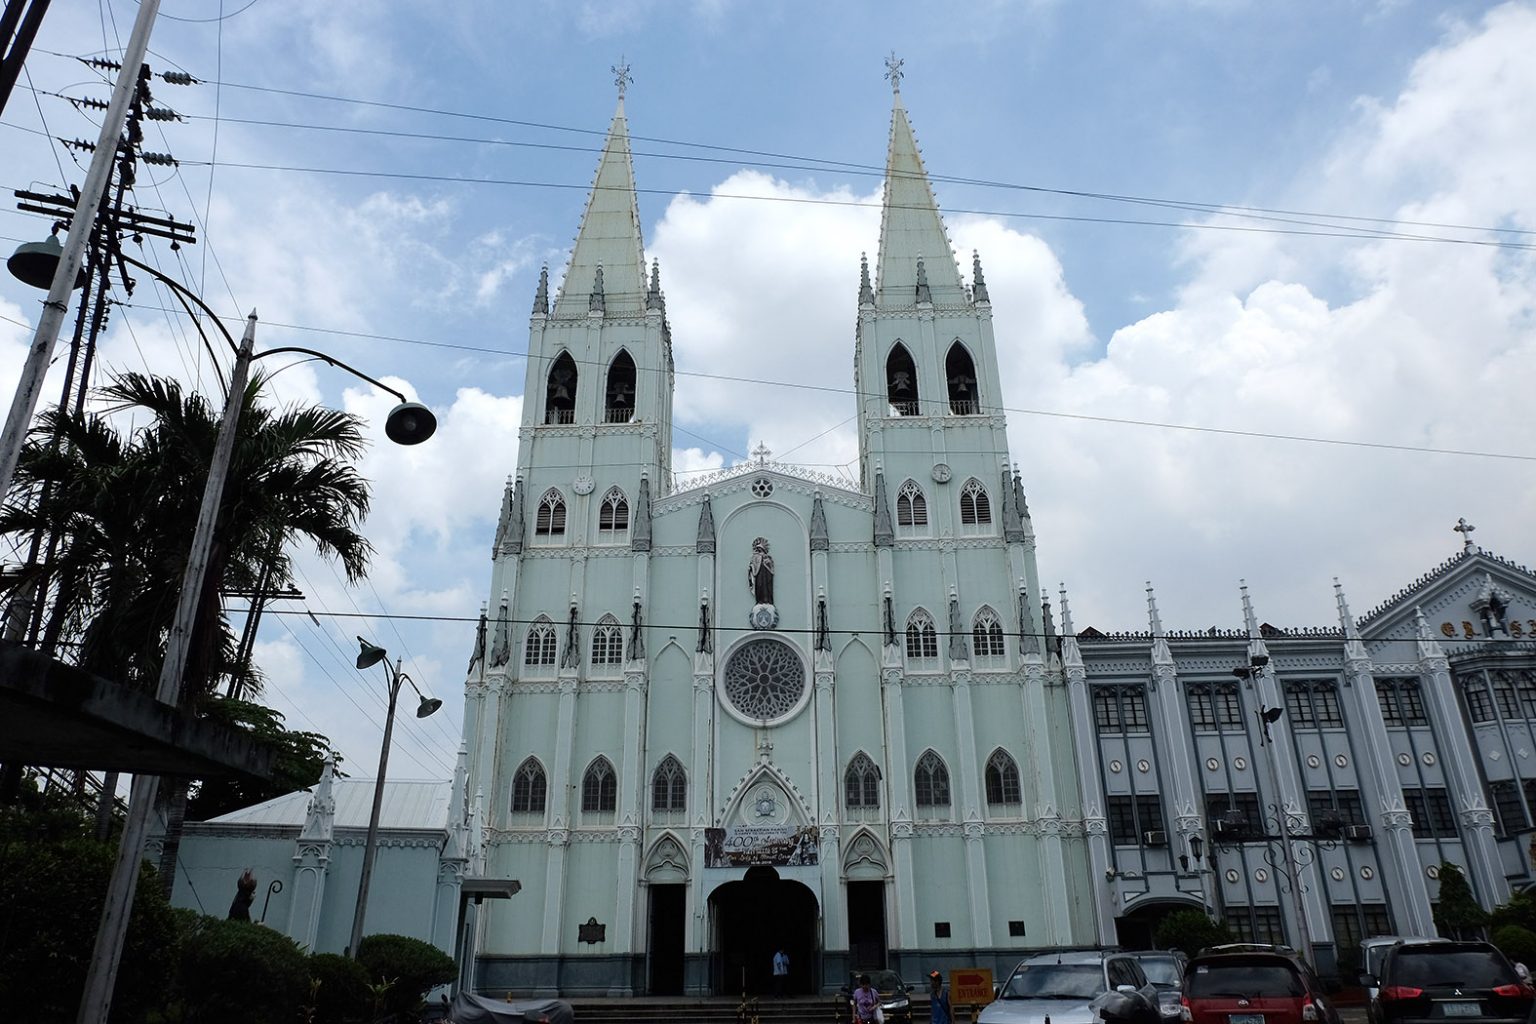 Online petition launched to oppose condo project behind historic San Sebastian Church